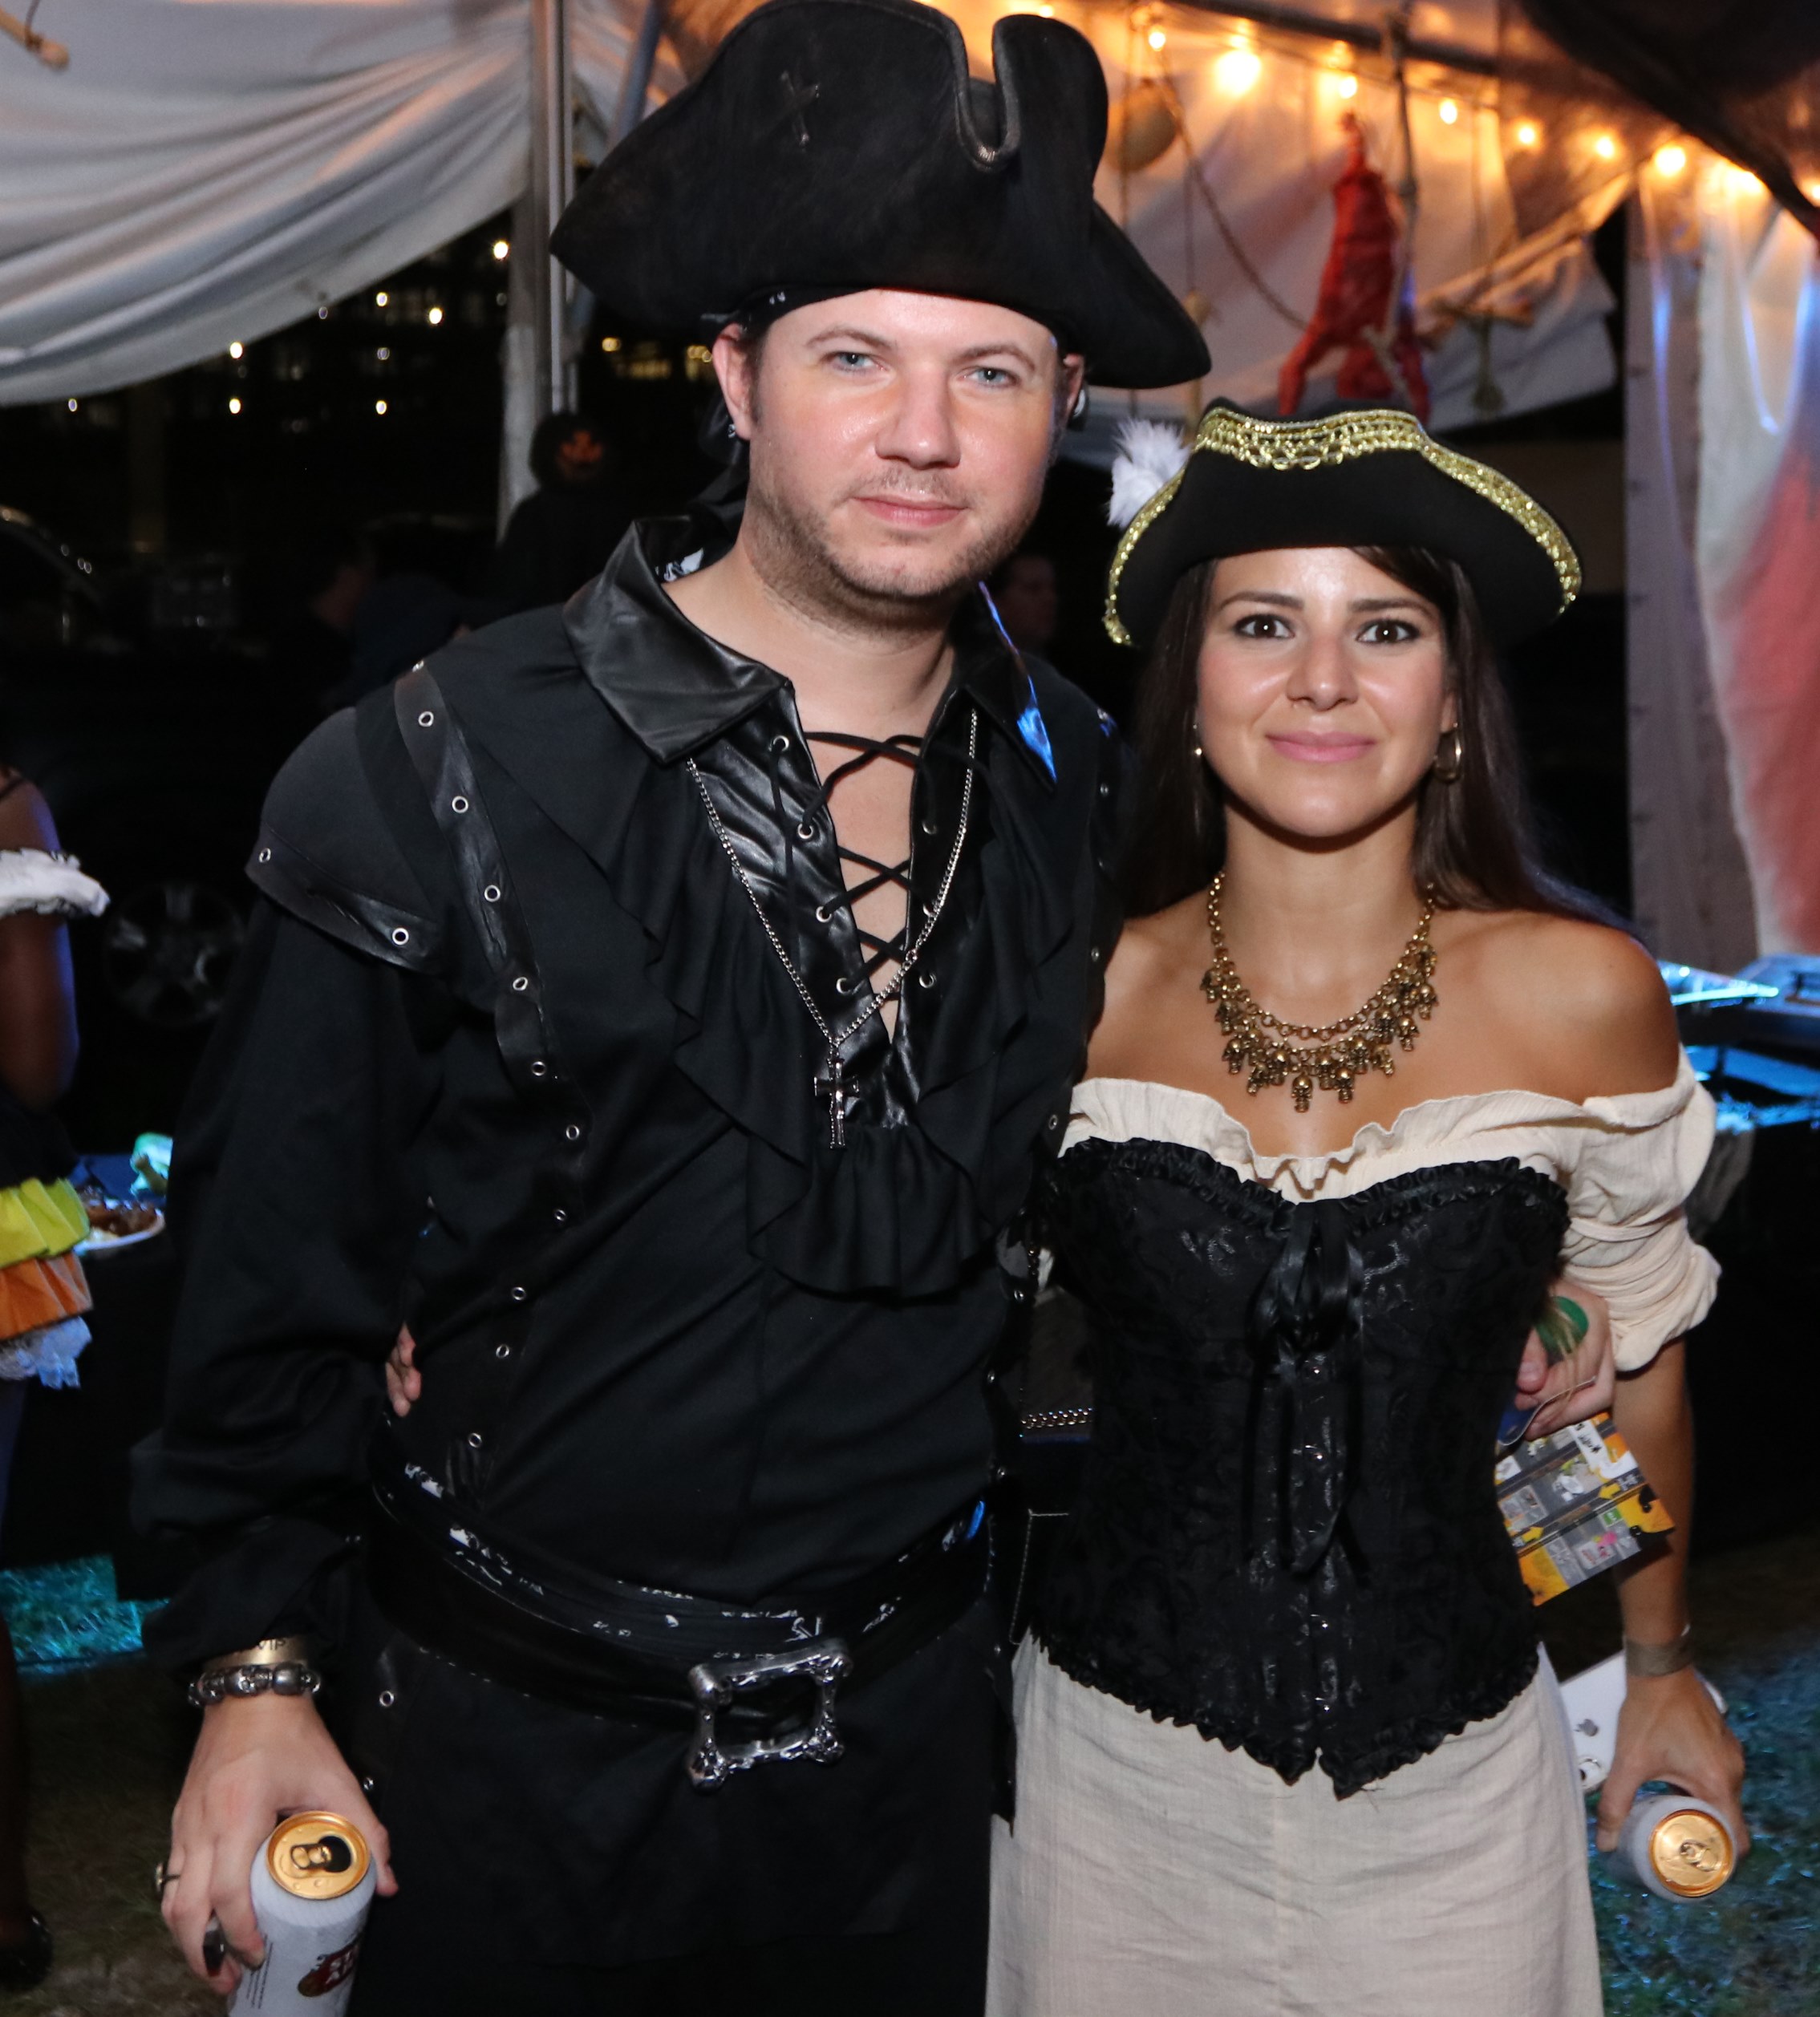 A couple of pirates at Moonfest 2019 (photo by: Mike Jalches)